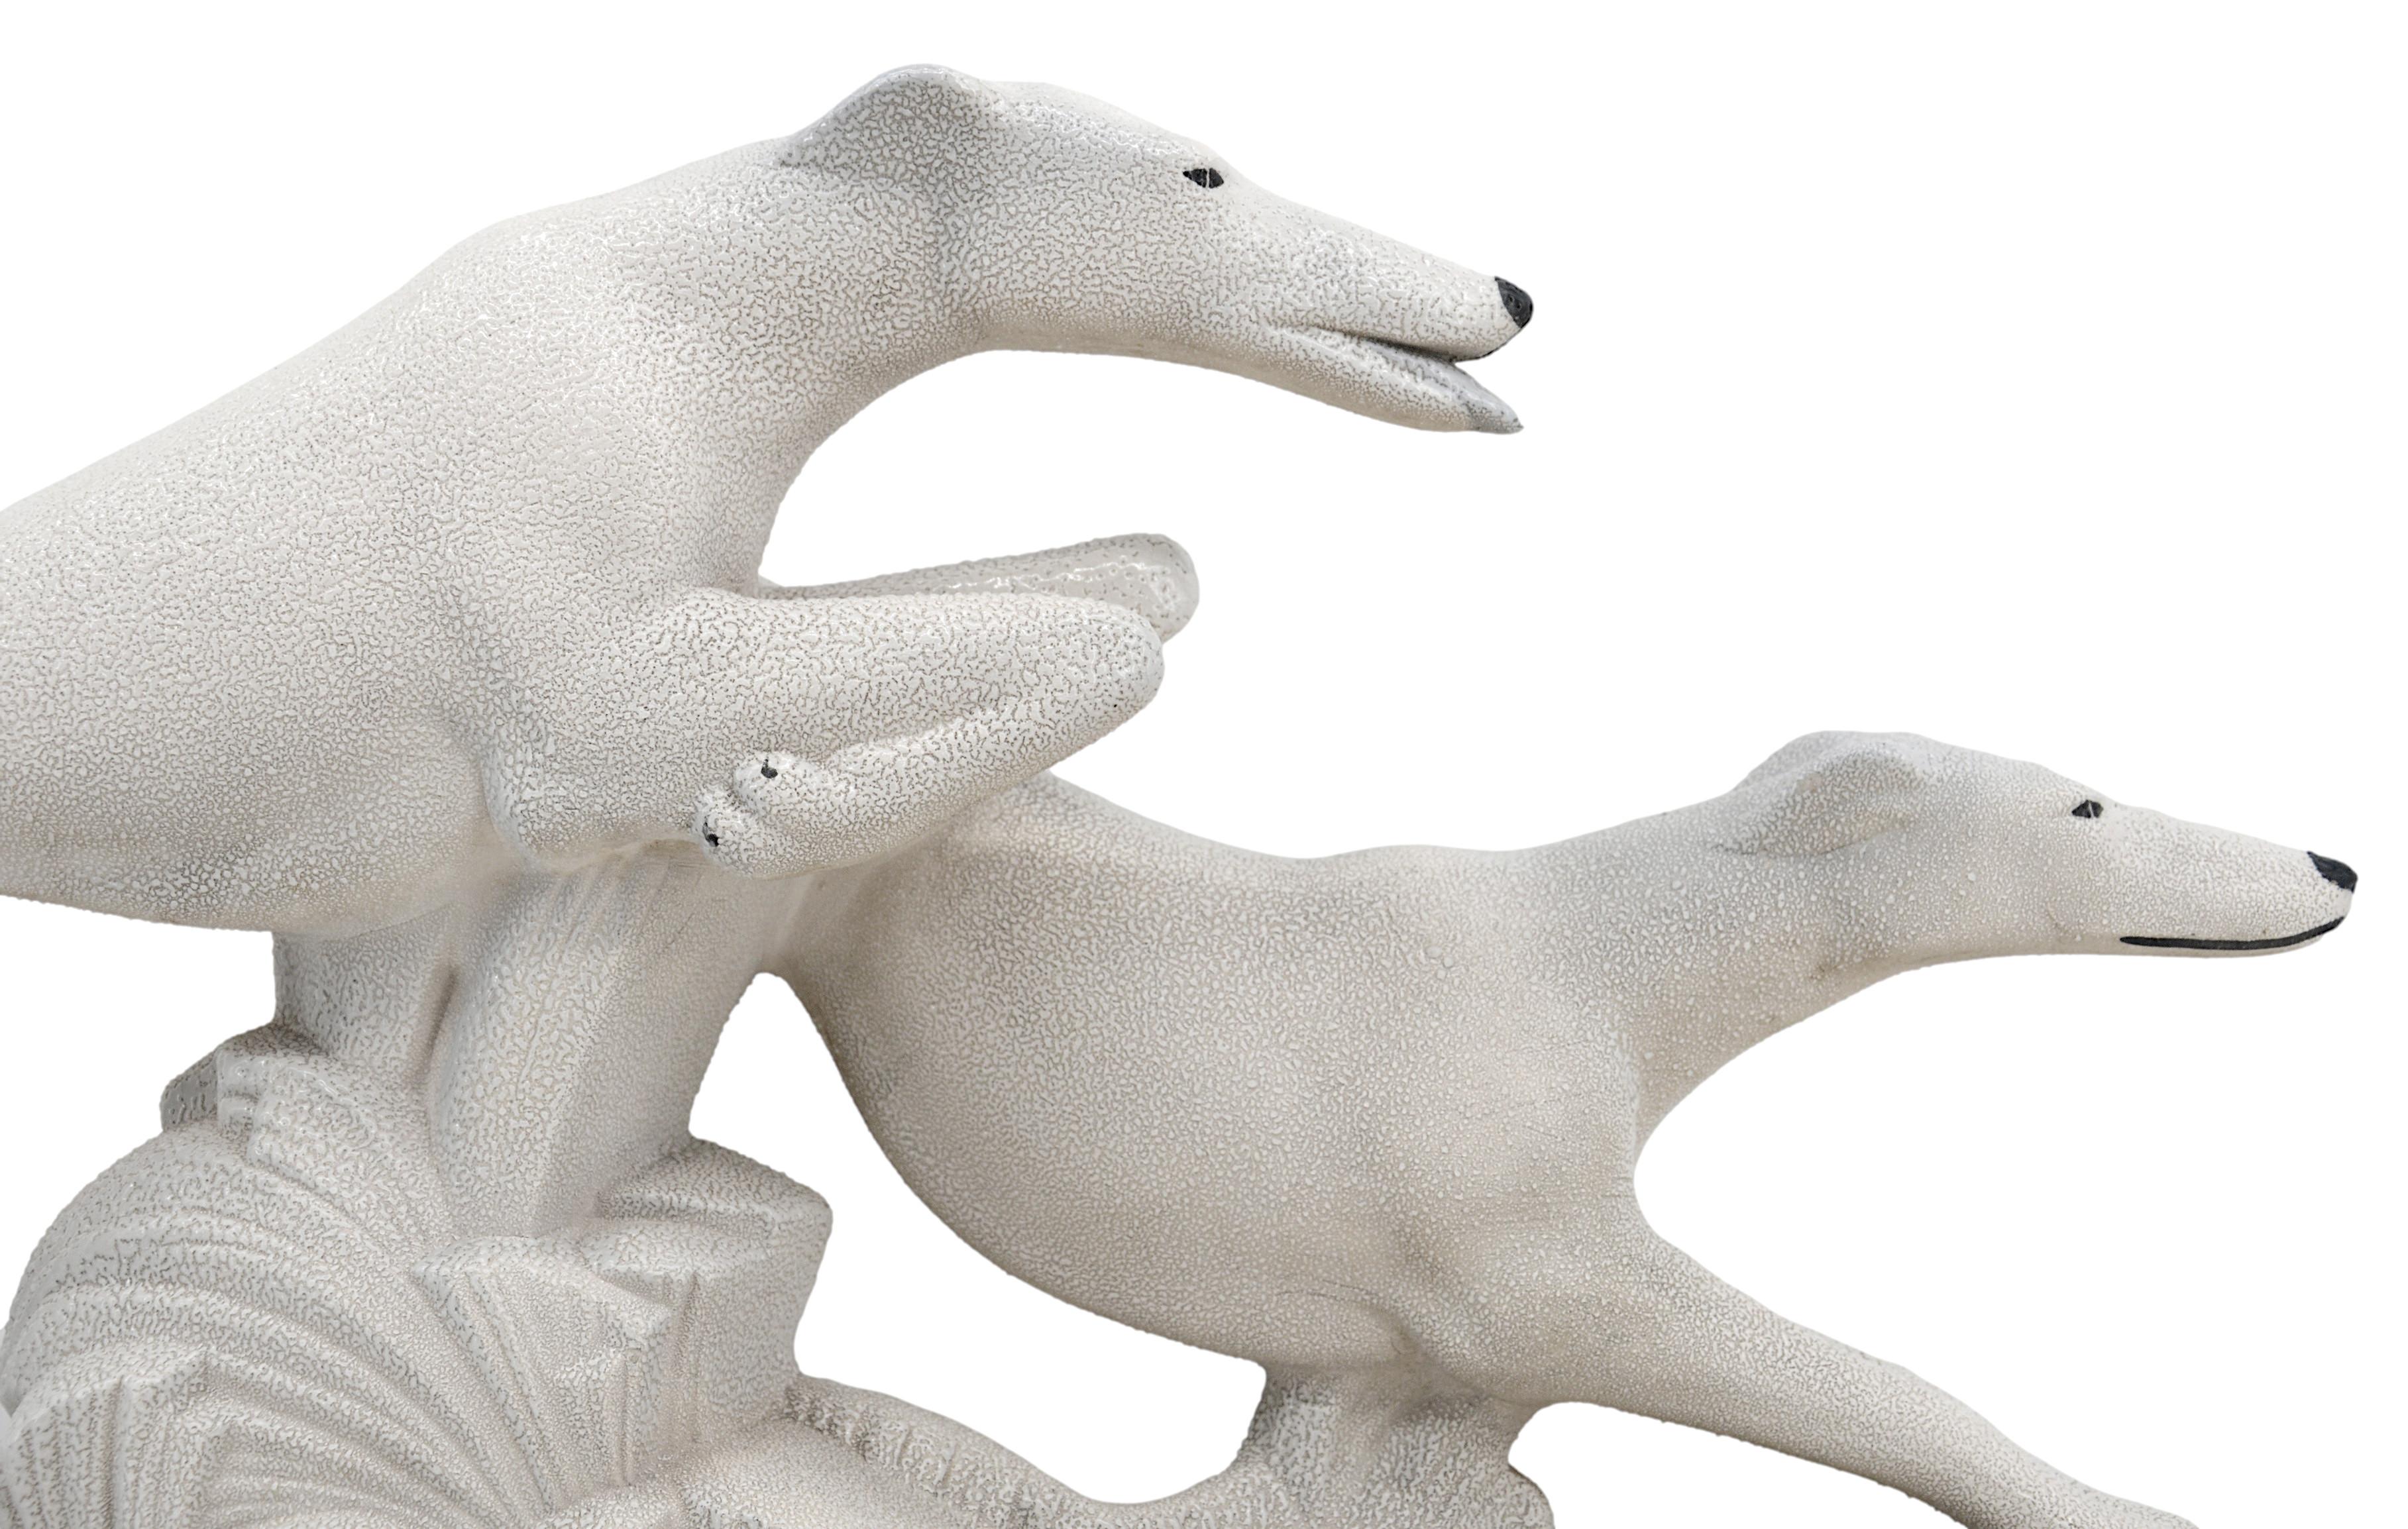 French Art Deco greyhound couple sculpture by Charles Lemanceau at Sainte-Radegonde, France, 1930. Greyhound race. Illustrated in the Sainte-Radegonde catalogue, page #8 (see photo). Width: 21.25